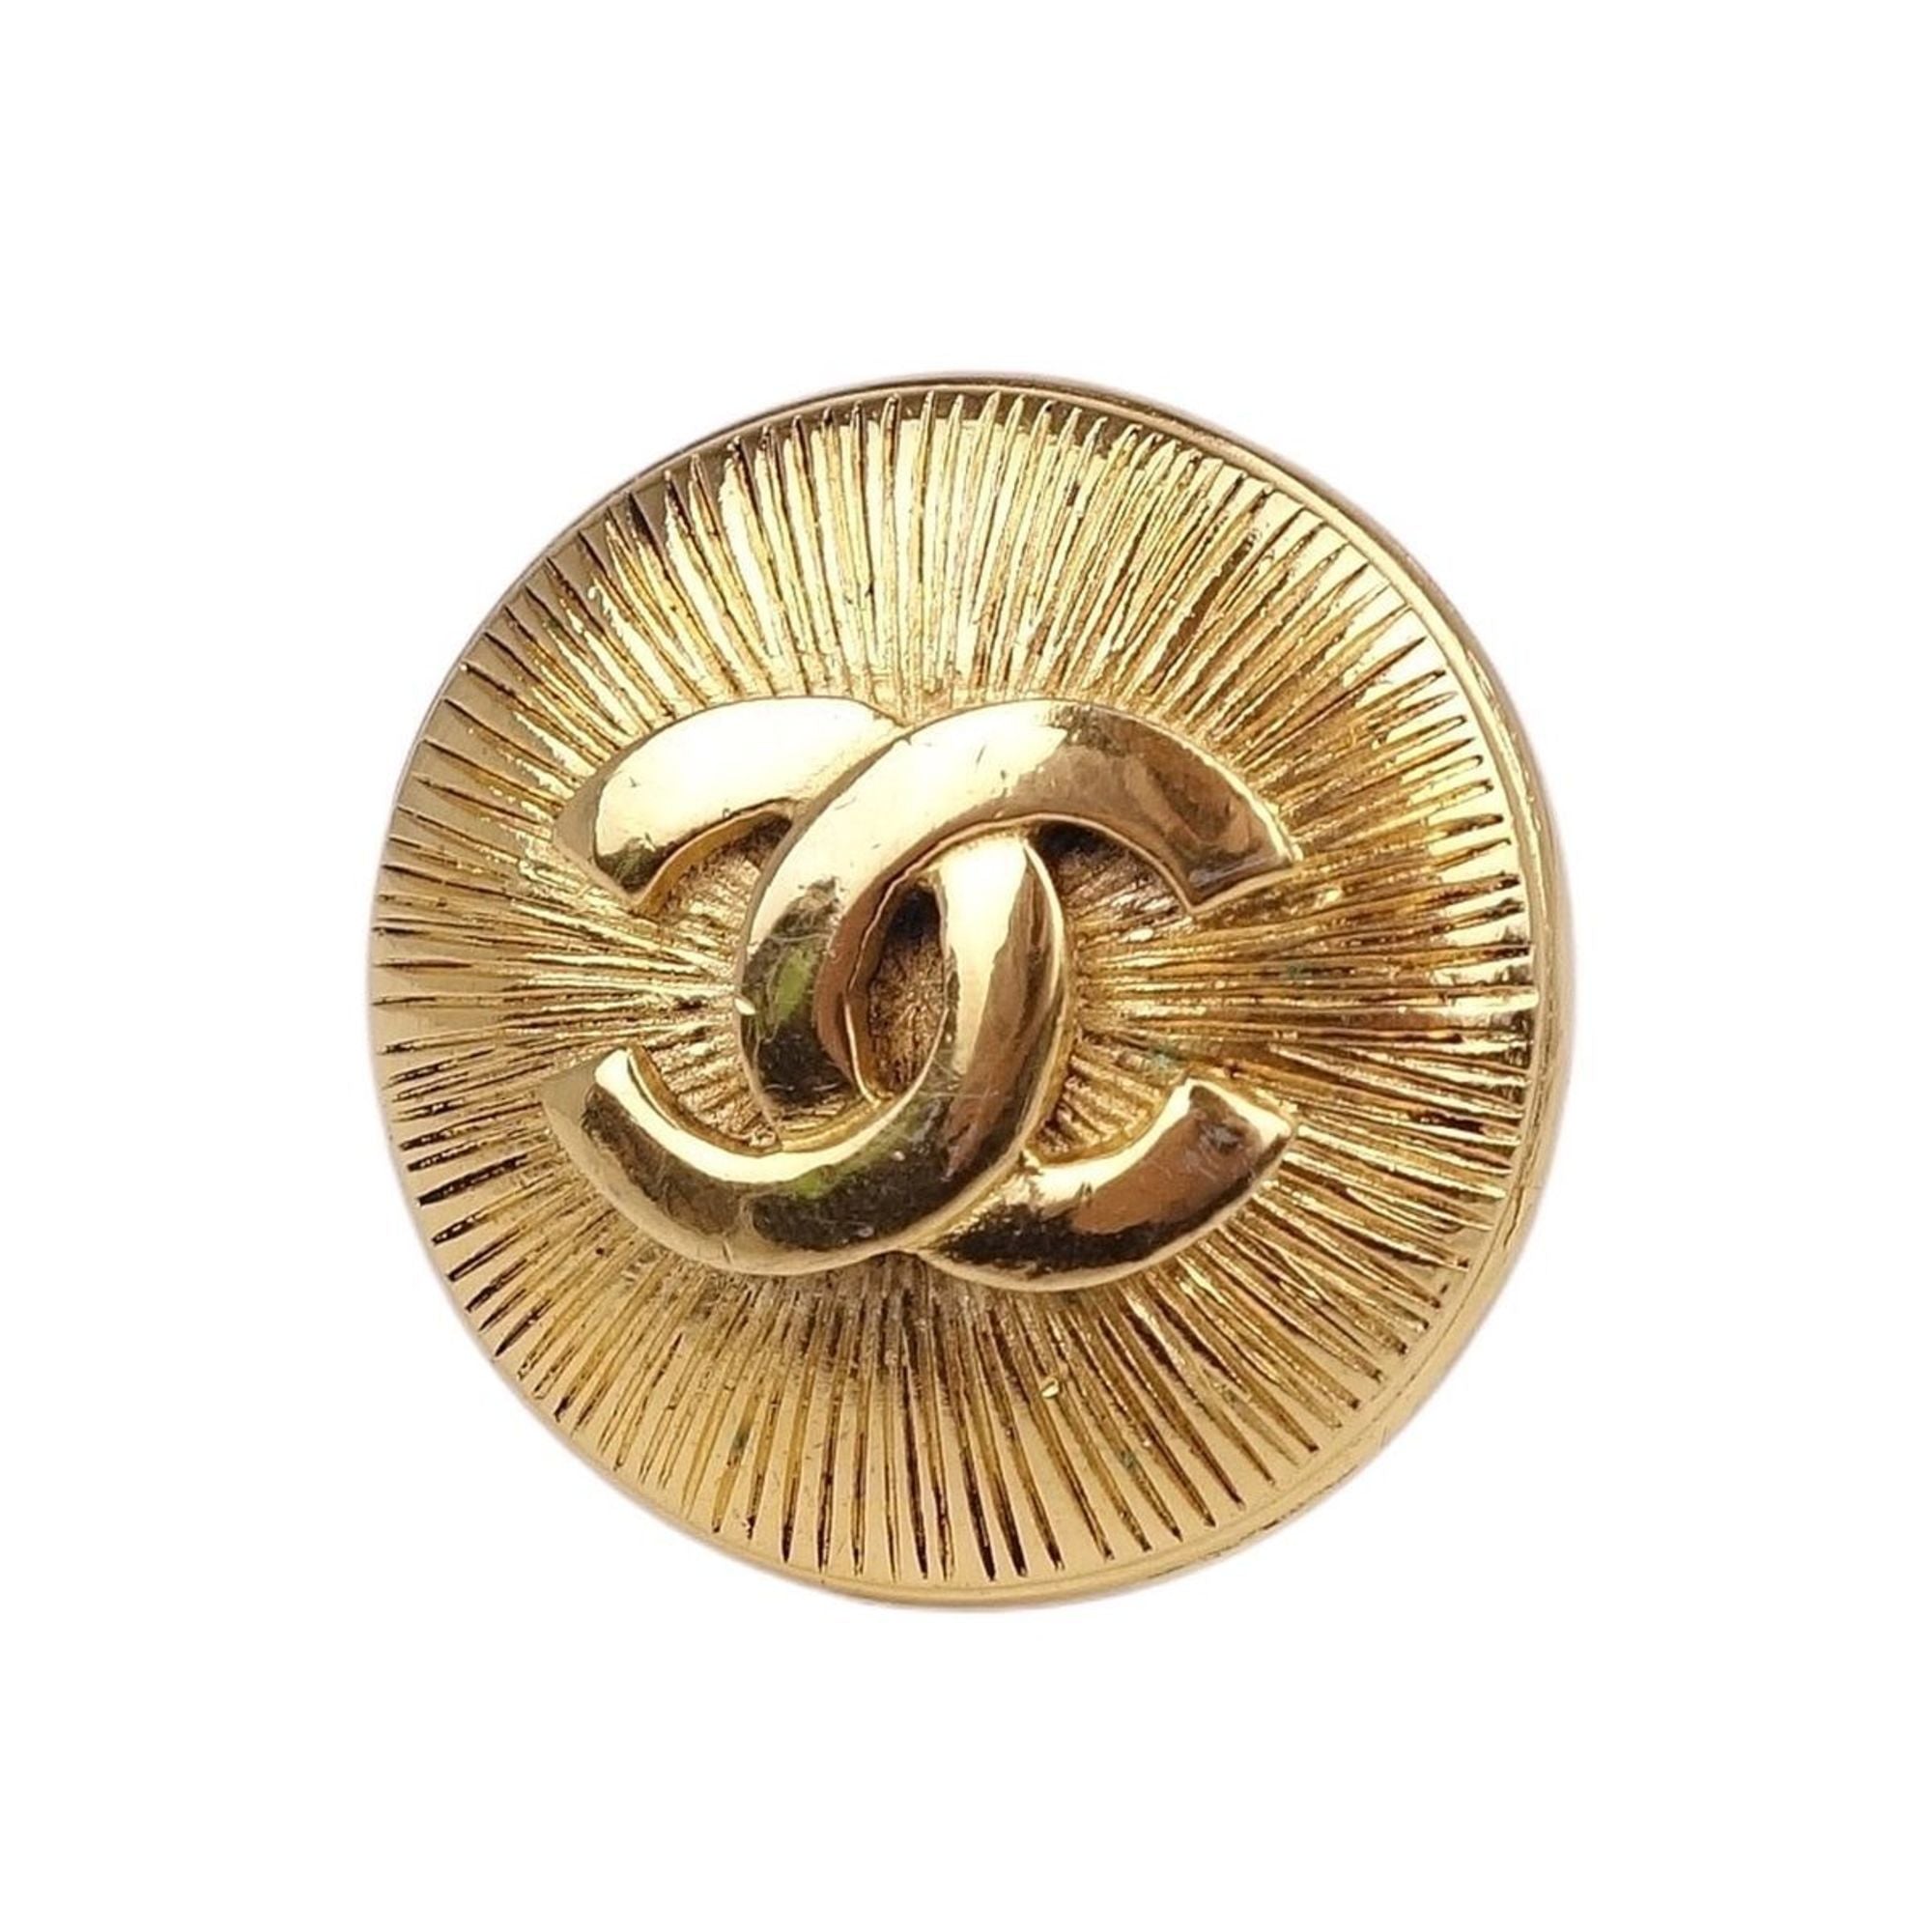 Chanel Brooch Coco Mark Pin Badge Round Women's Gold